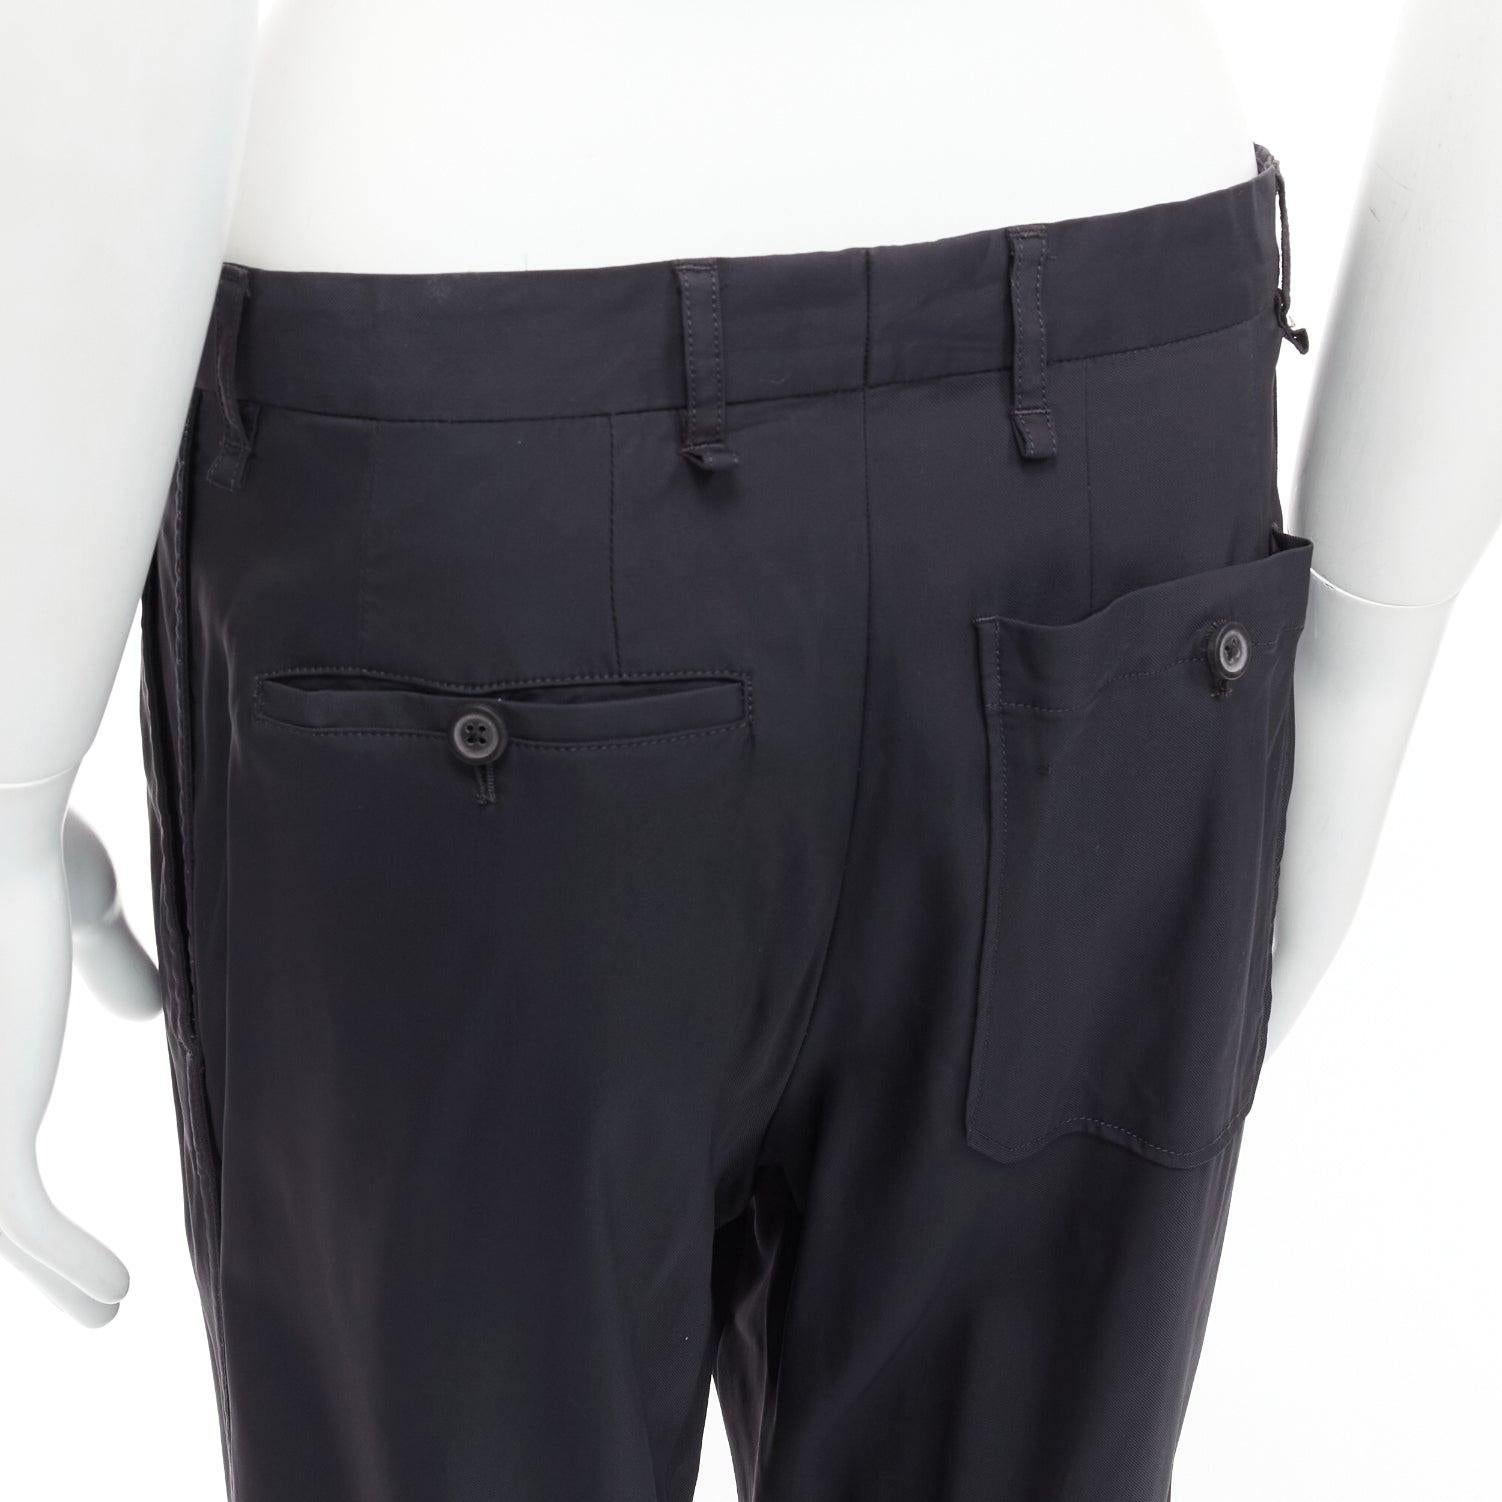 LANVIN navy viscose blend front pleats classy tapered dress pants IT46 S
Reference: CNLE/A00284
Brand: Lanvin
Designer: Alber Elbaz
Material: Viscose, Blend
Color: Navy
Pattern: Solid
Closure: Zip Fly
Made in: Italy

CONDITION:
Condition: Good, this